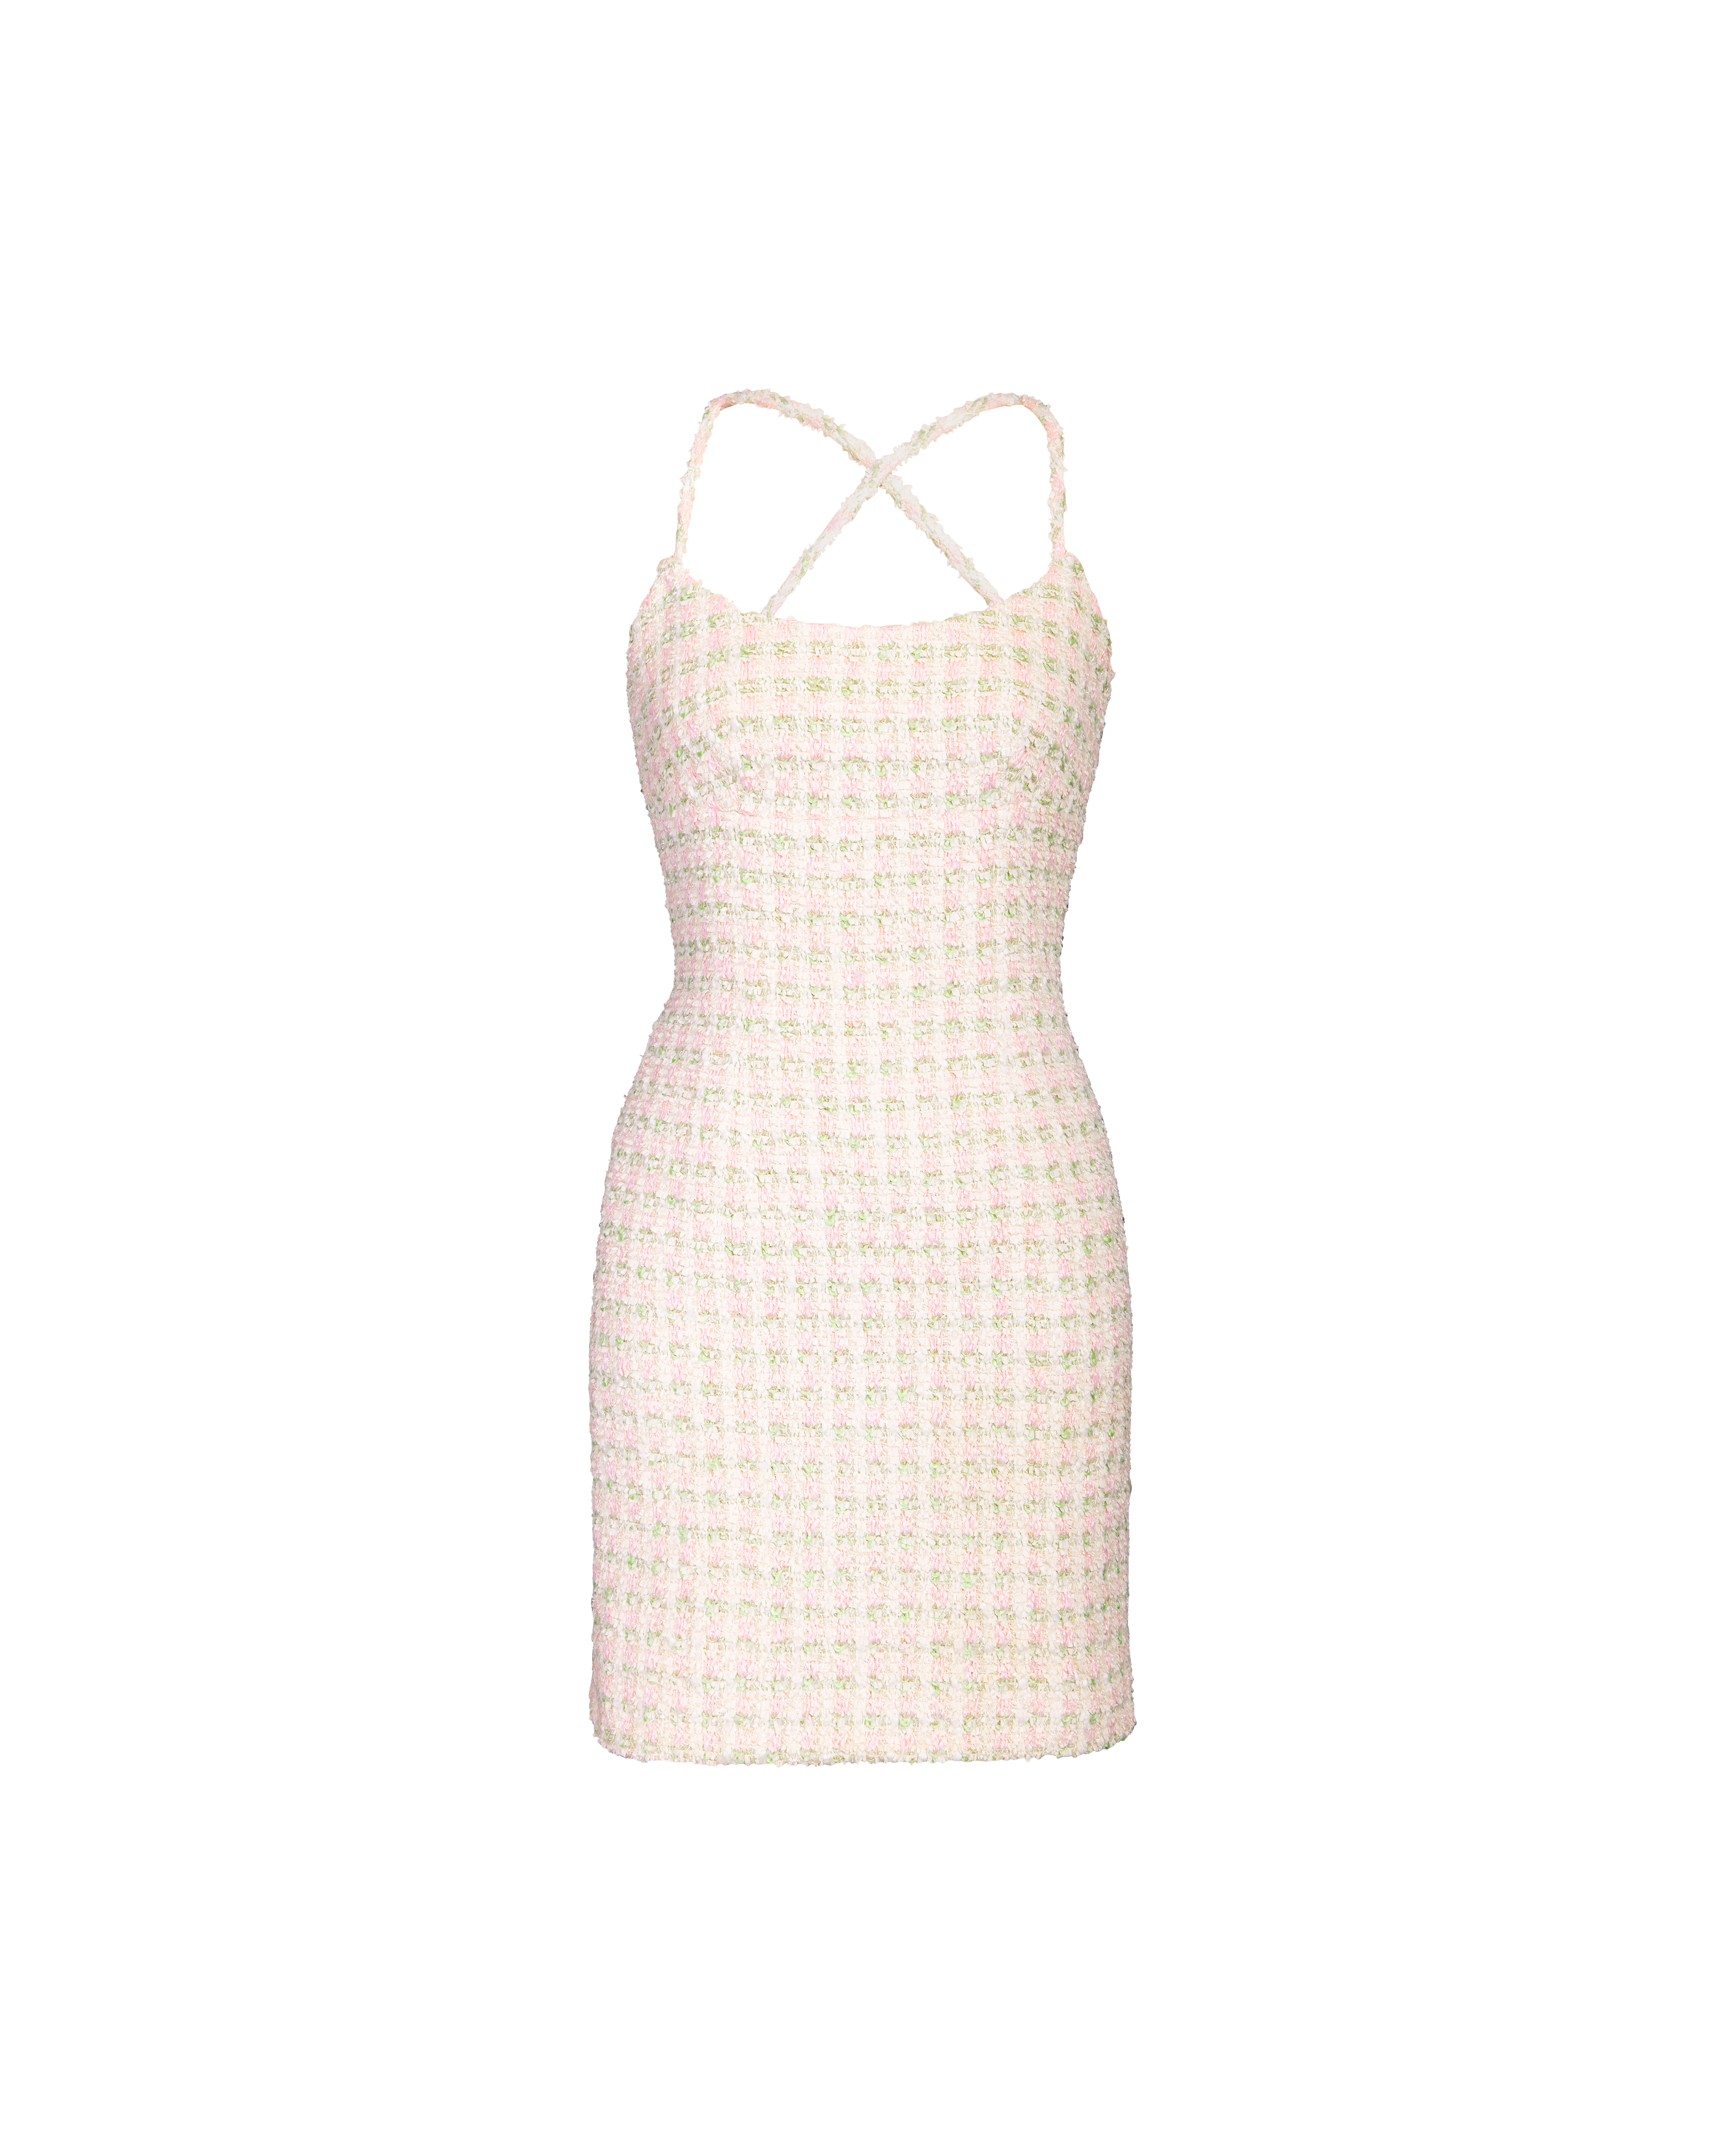 S/S 1992 Metallic Cream Boucle with Pink and Green Checkered Tweed Mini Dress